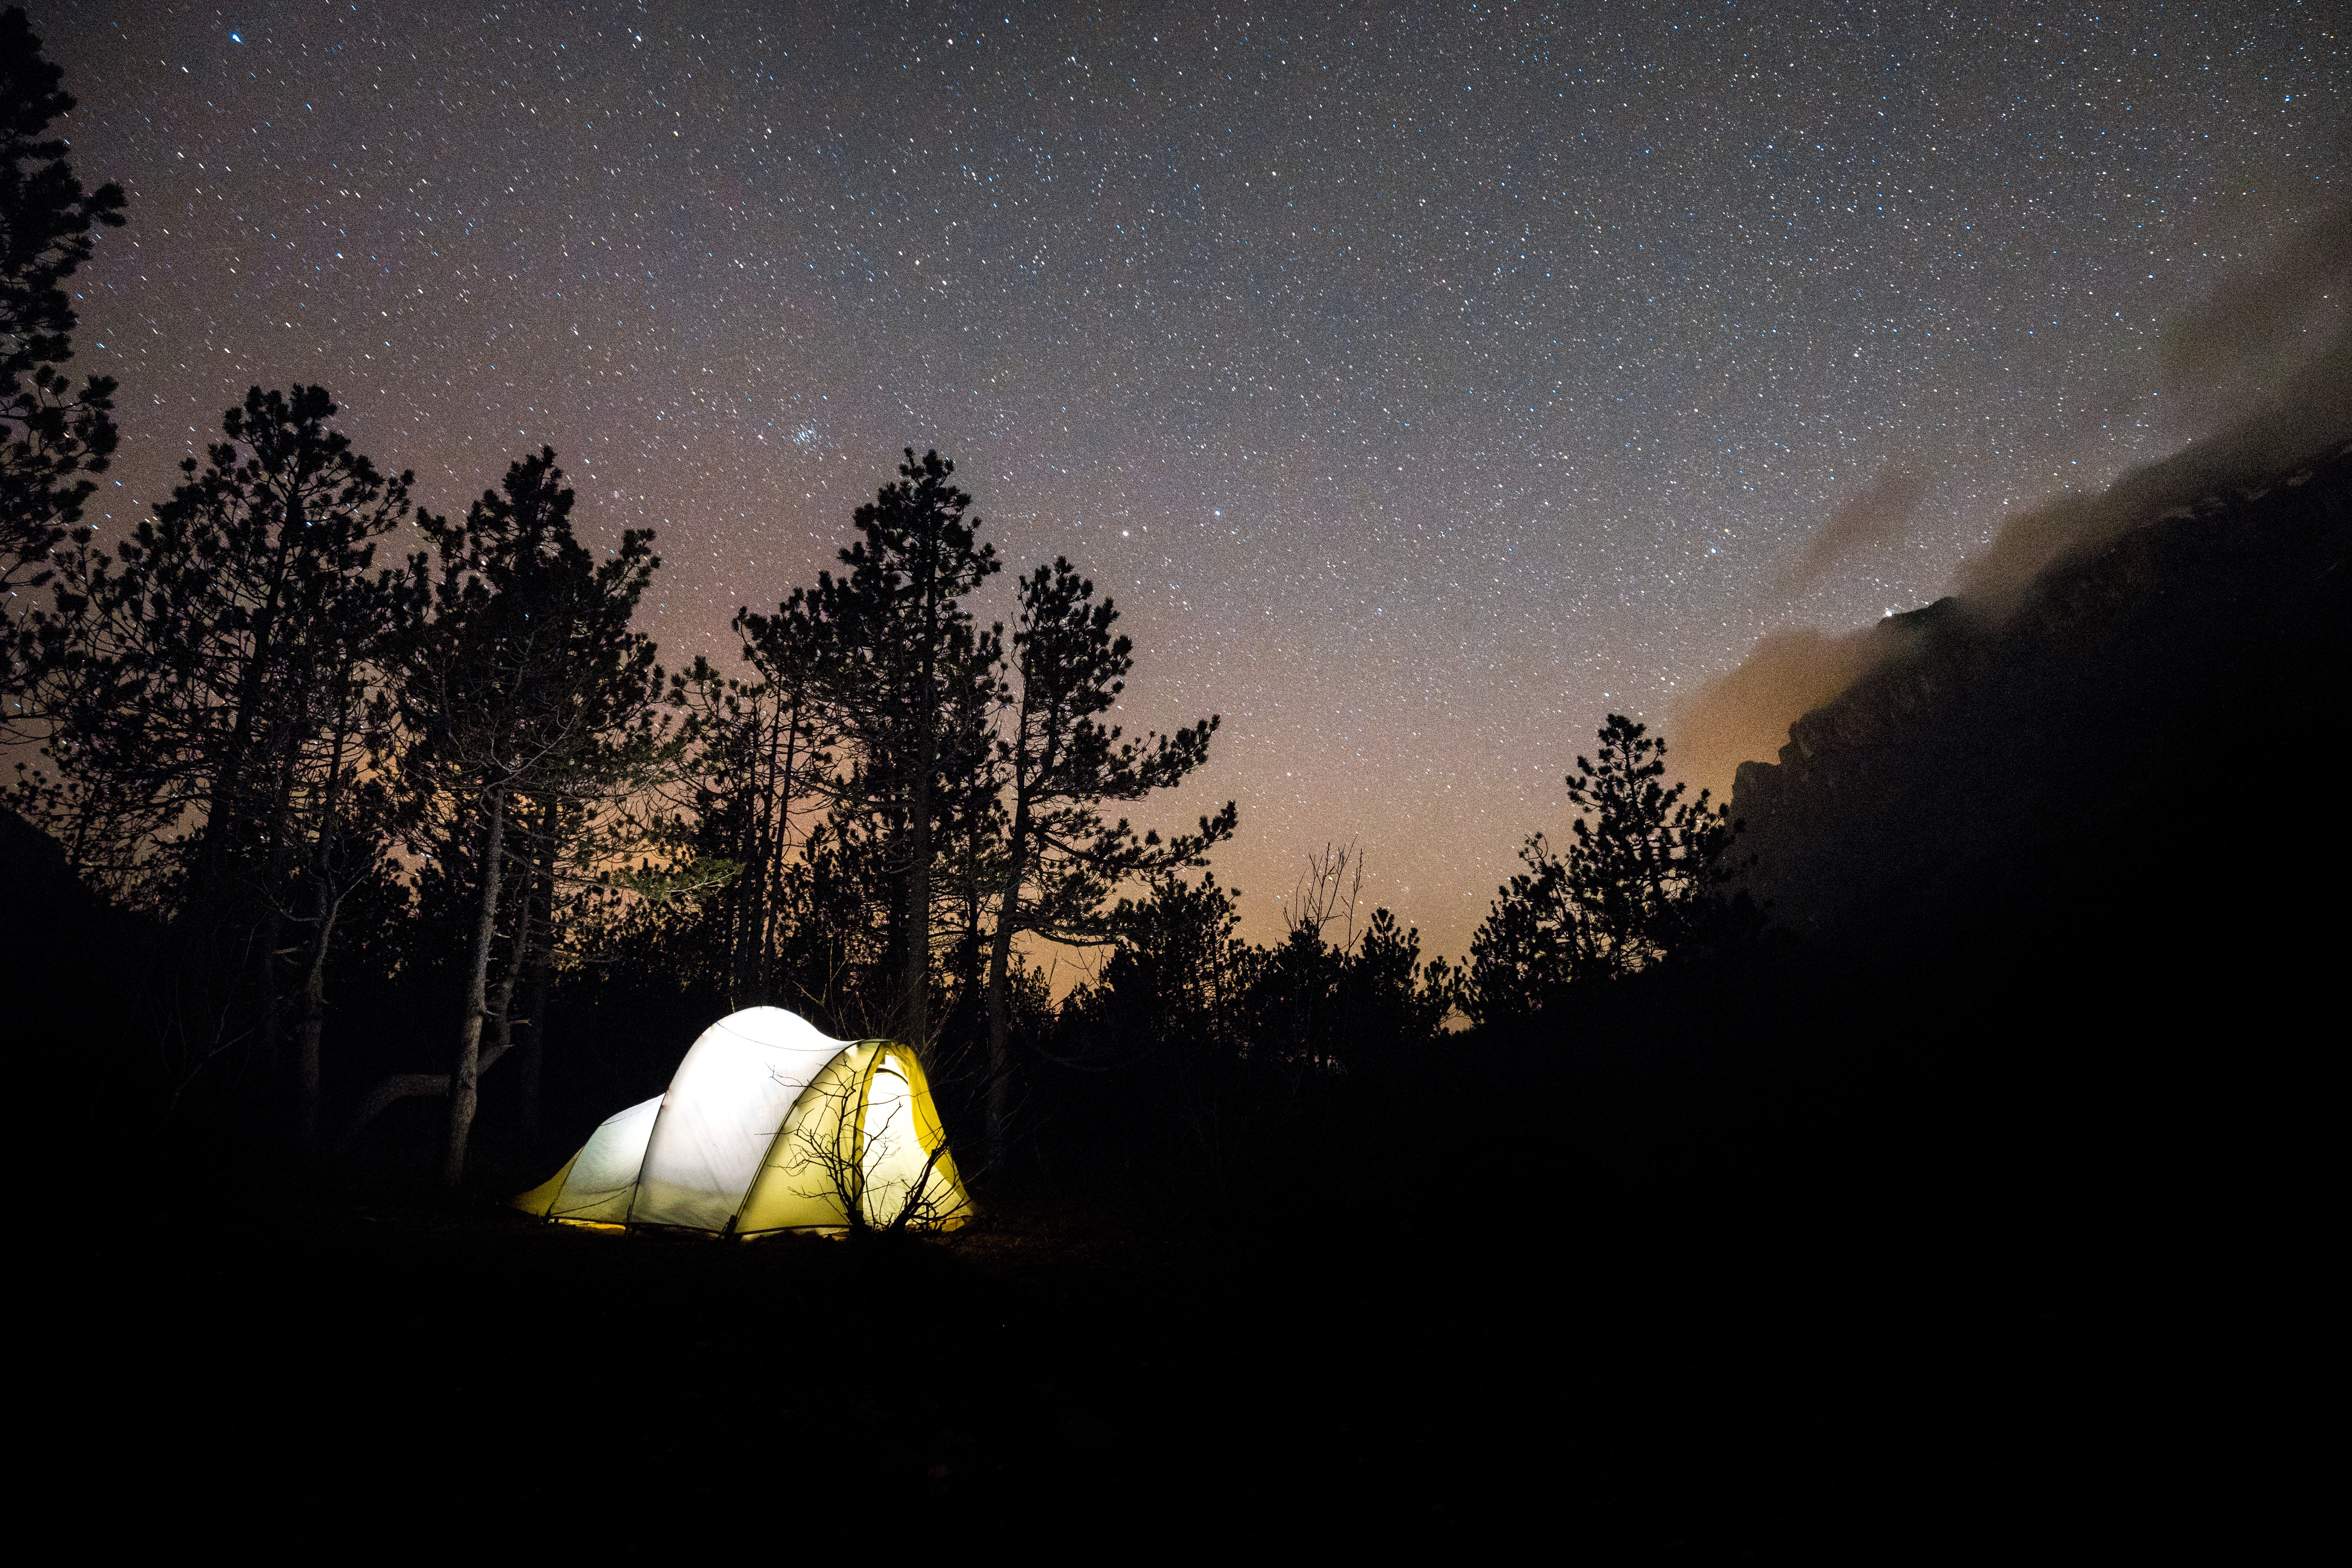 journey, nature, night, starry sky, tent, camping, campsite Full HD